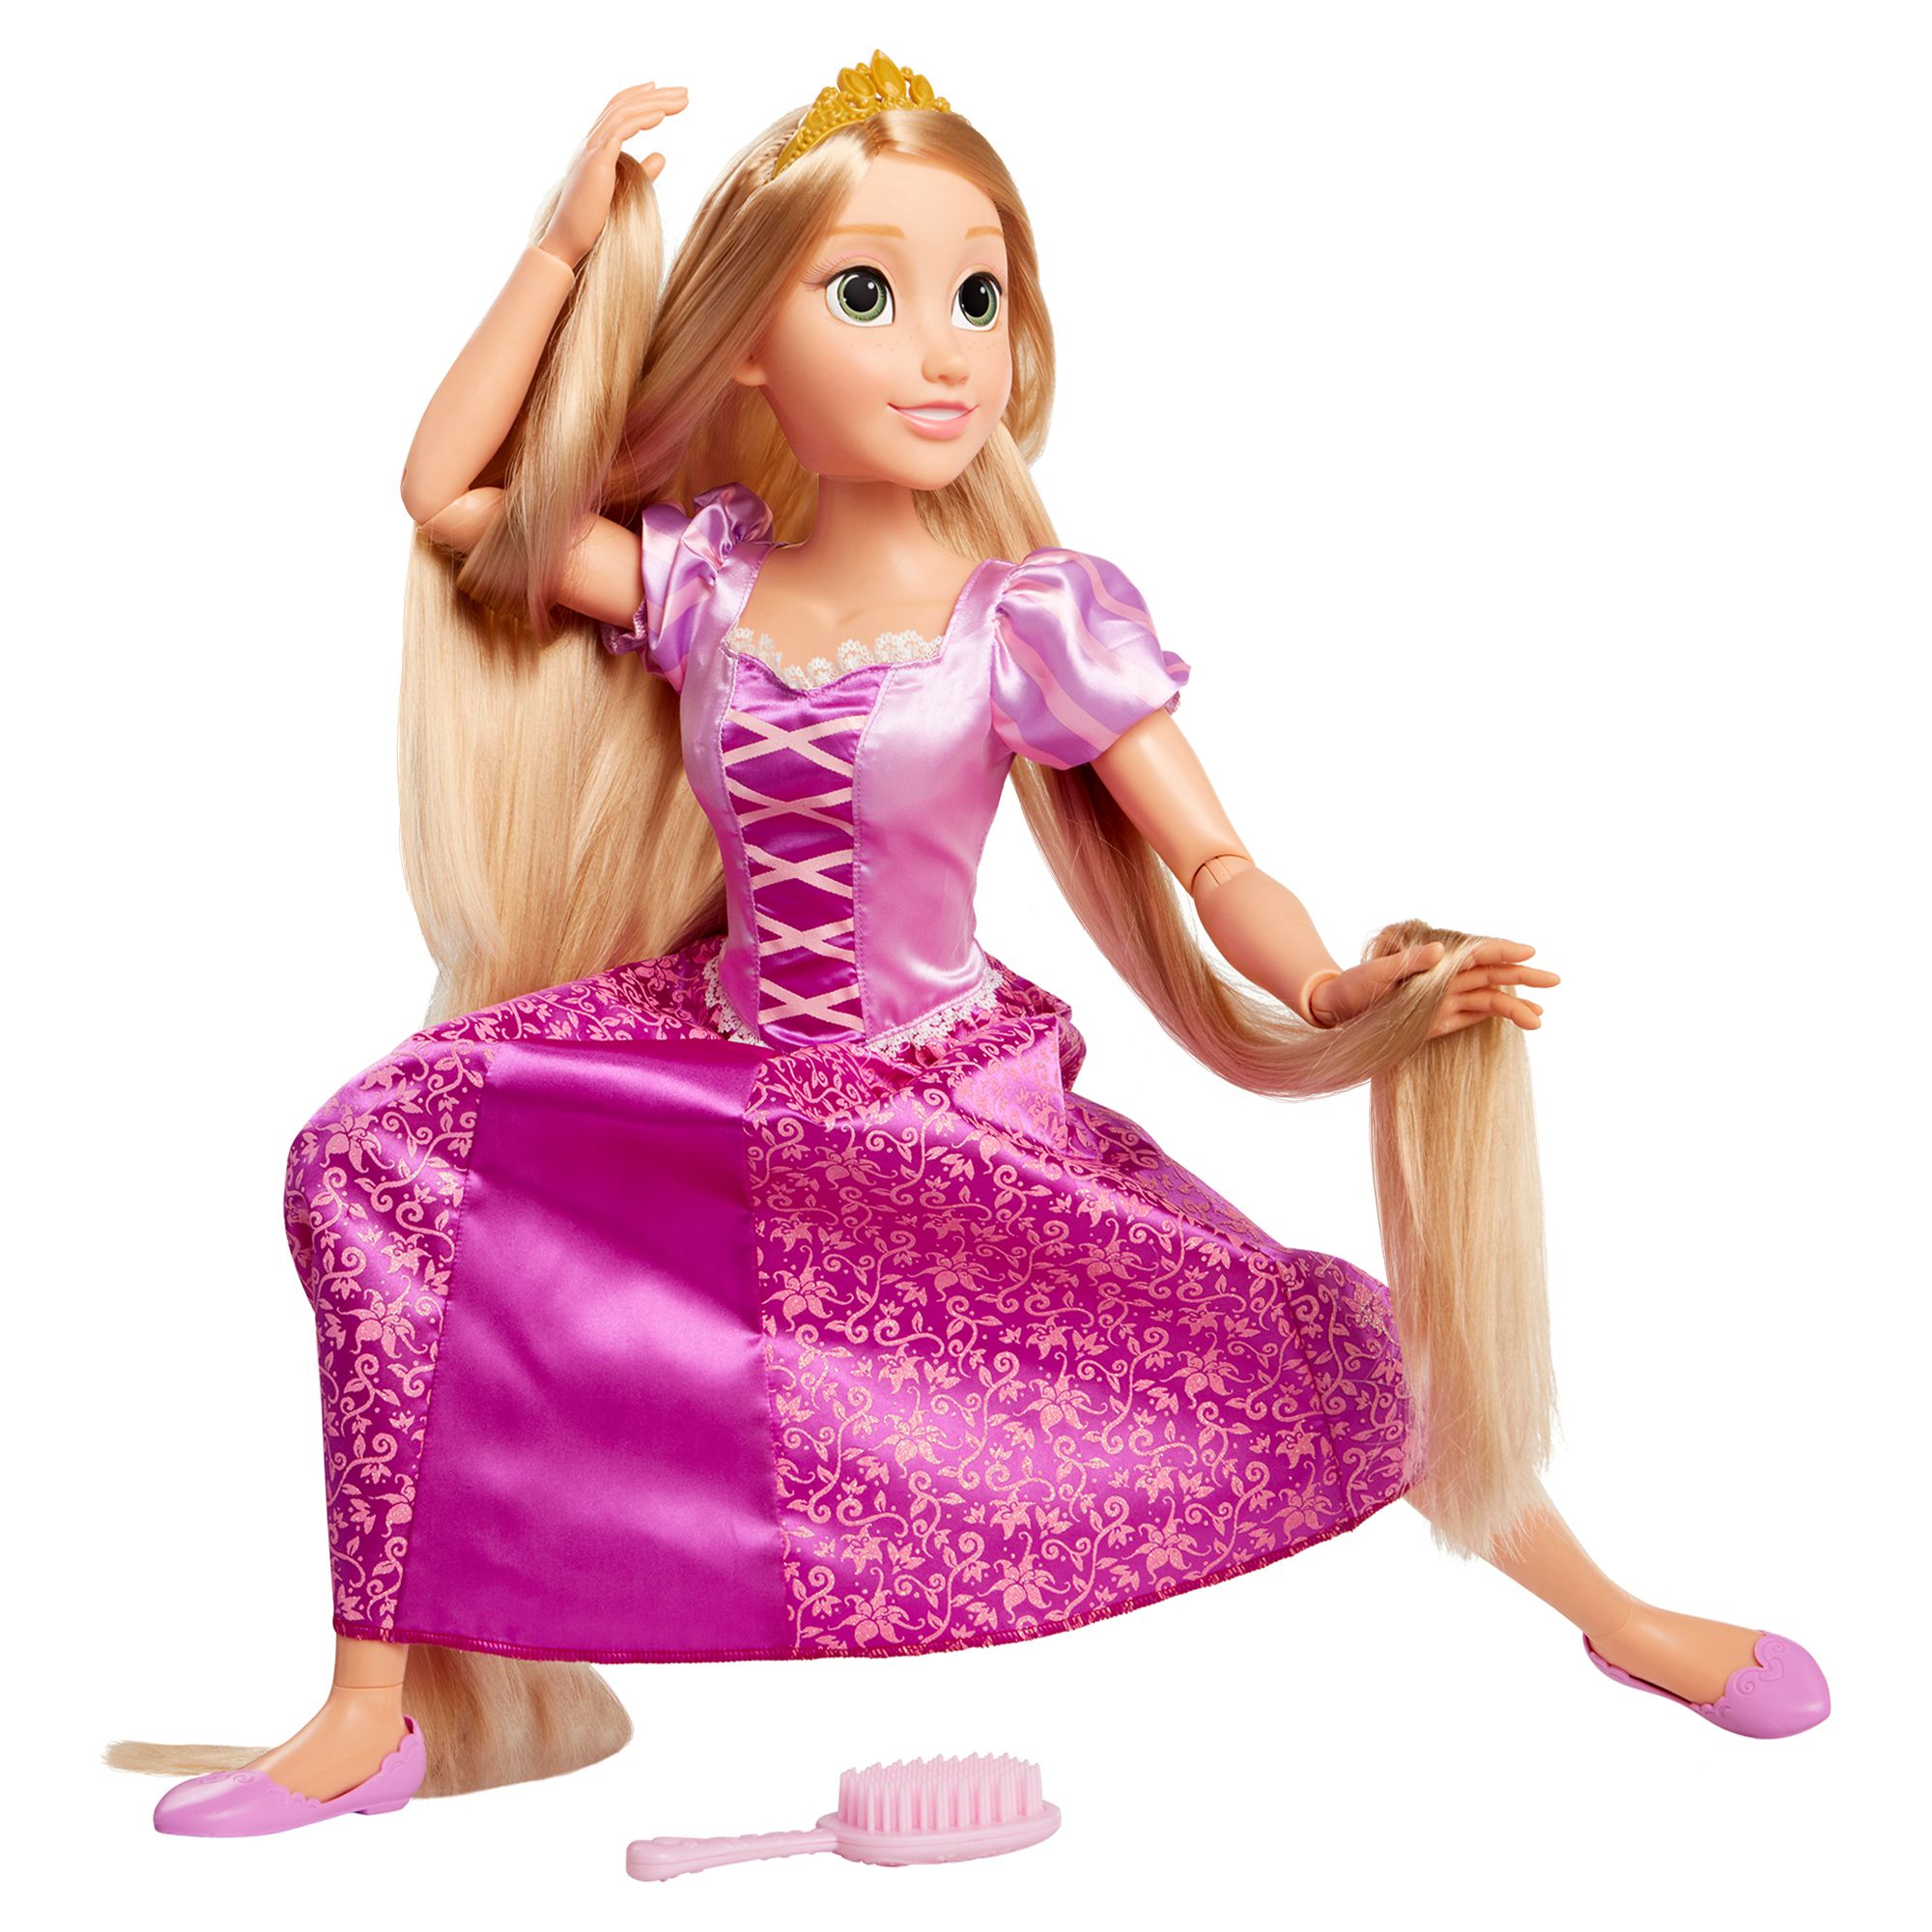 Disney Princess 32 inch Playdate Rapunzel Doll, for Children Ages 3+ - image 4 of 8